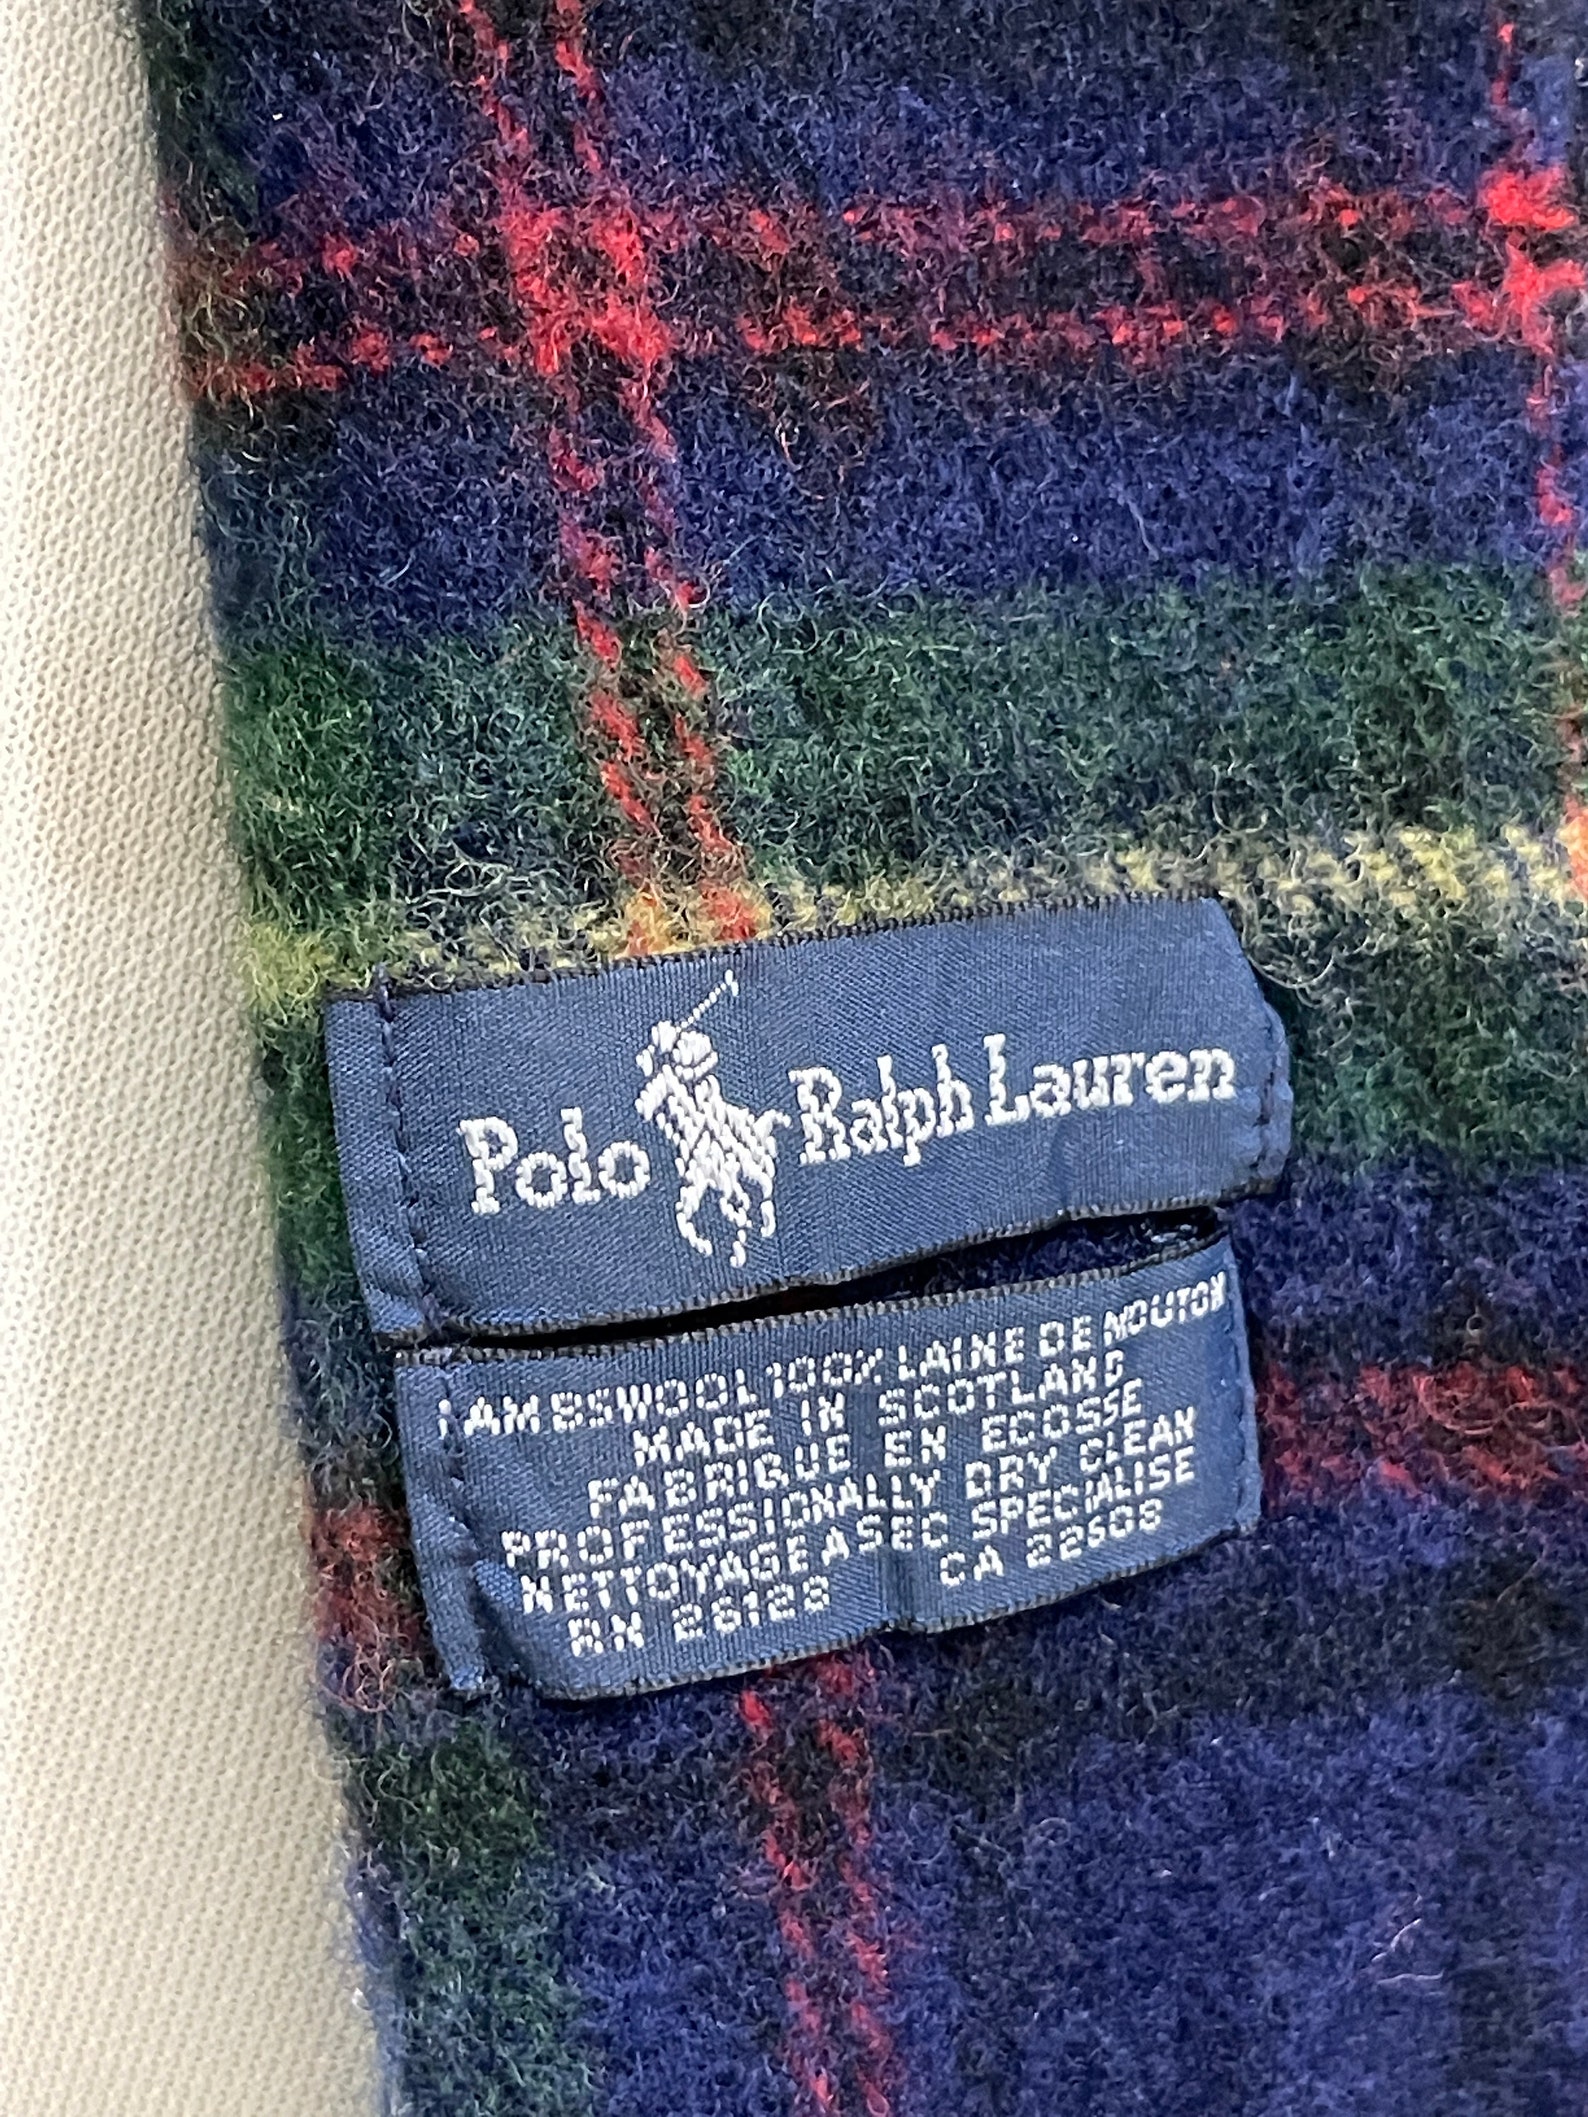 Polo Ralph Lauren Scarf 100% Lambswool Made In Scotland | Etsy